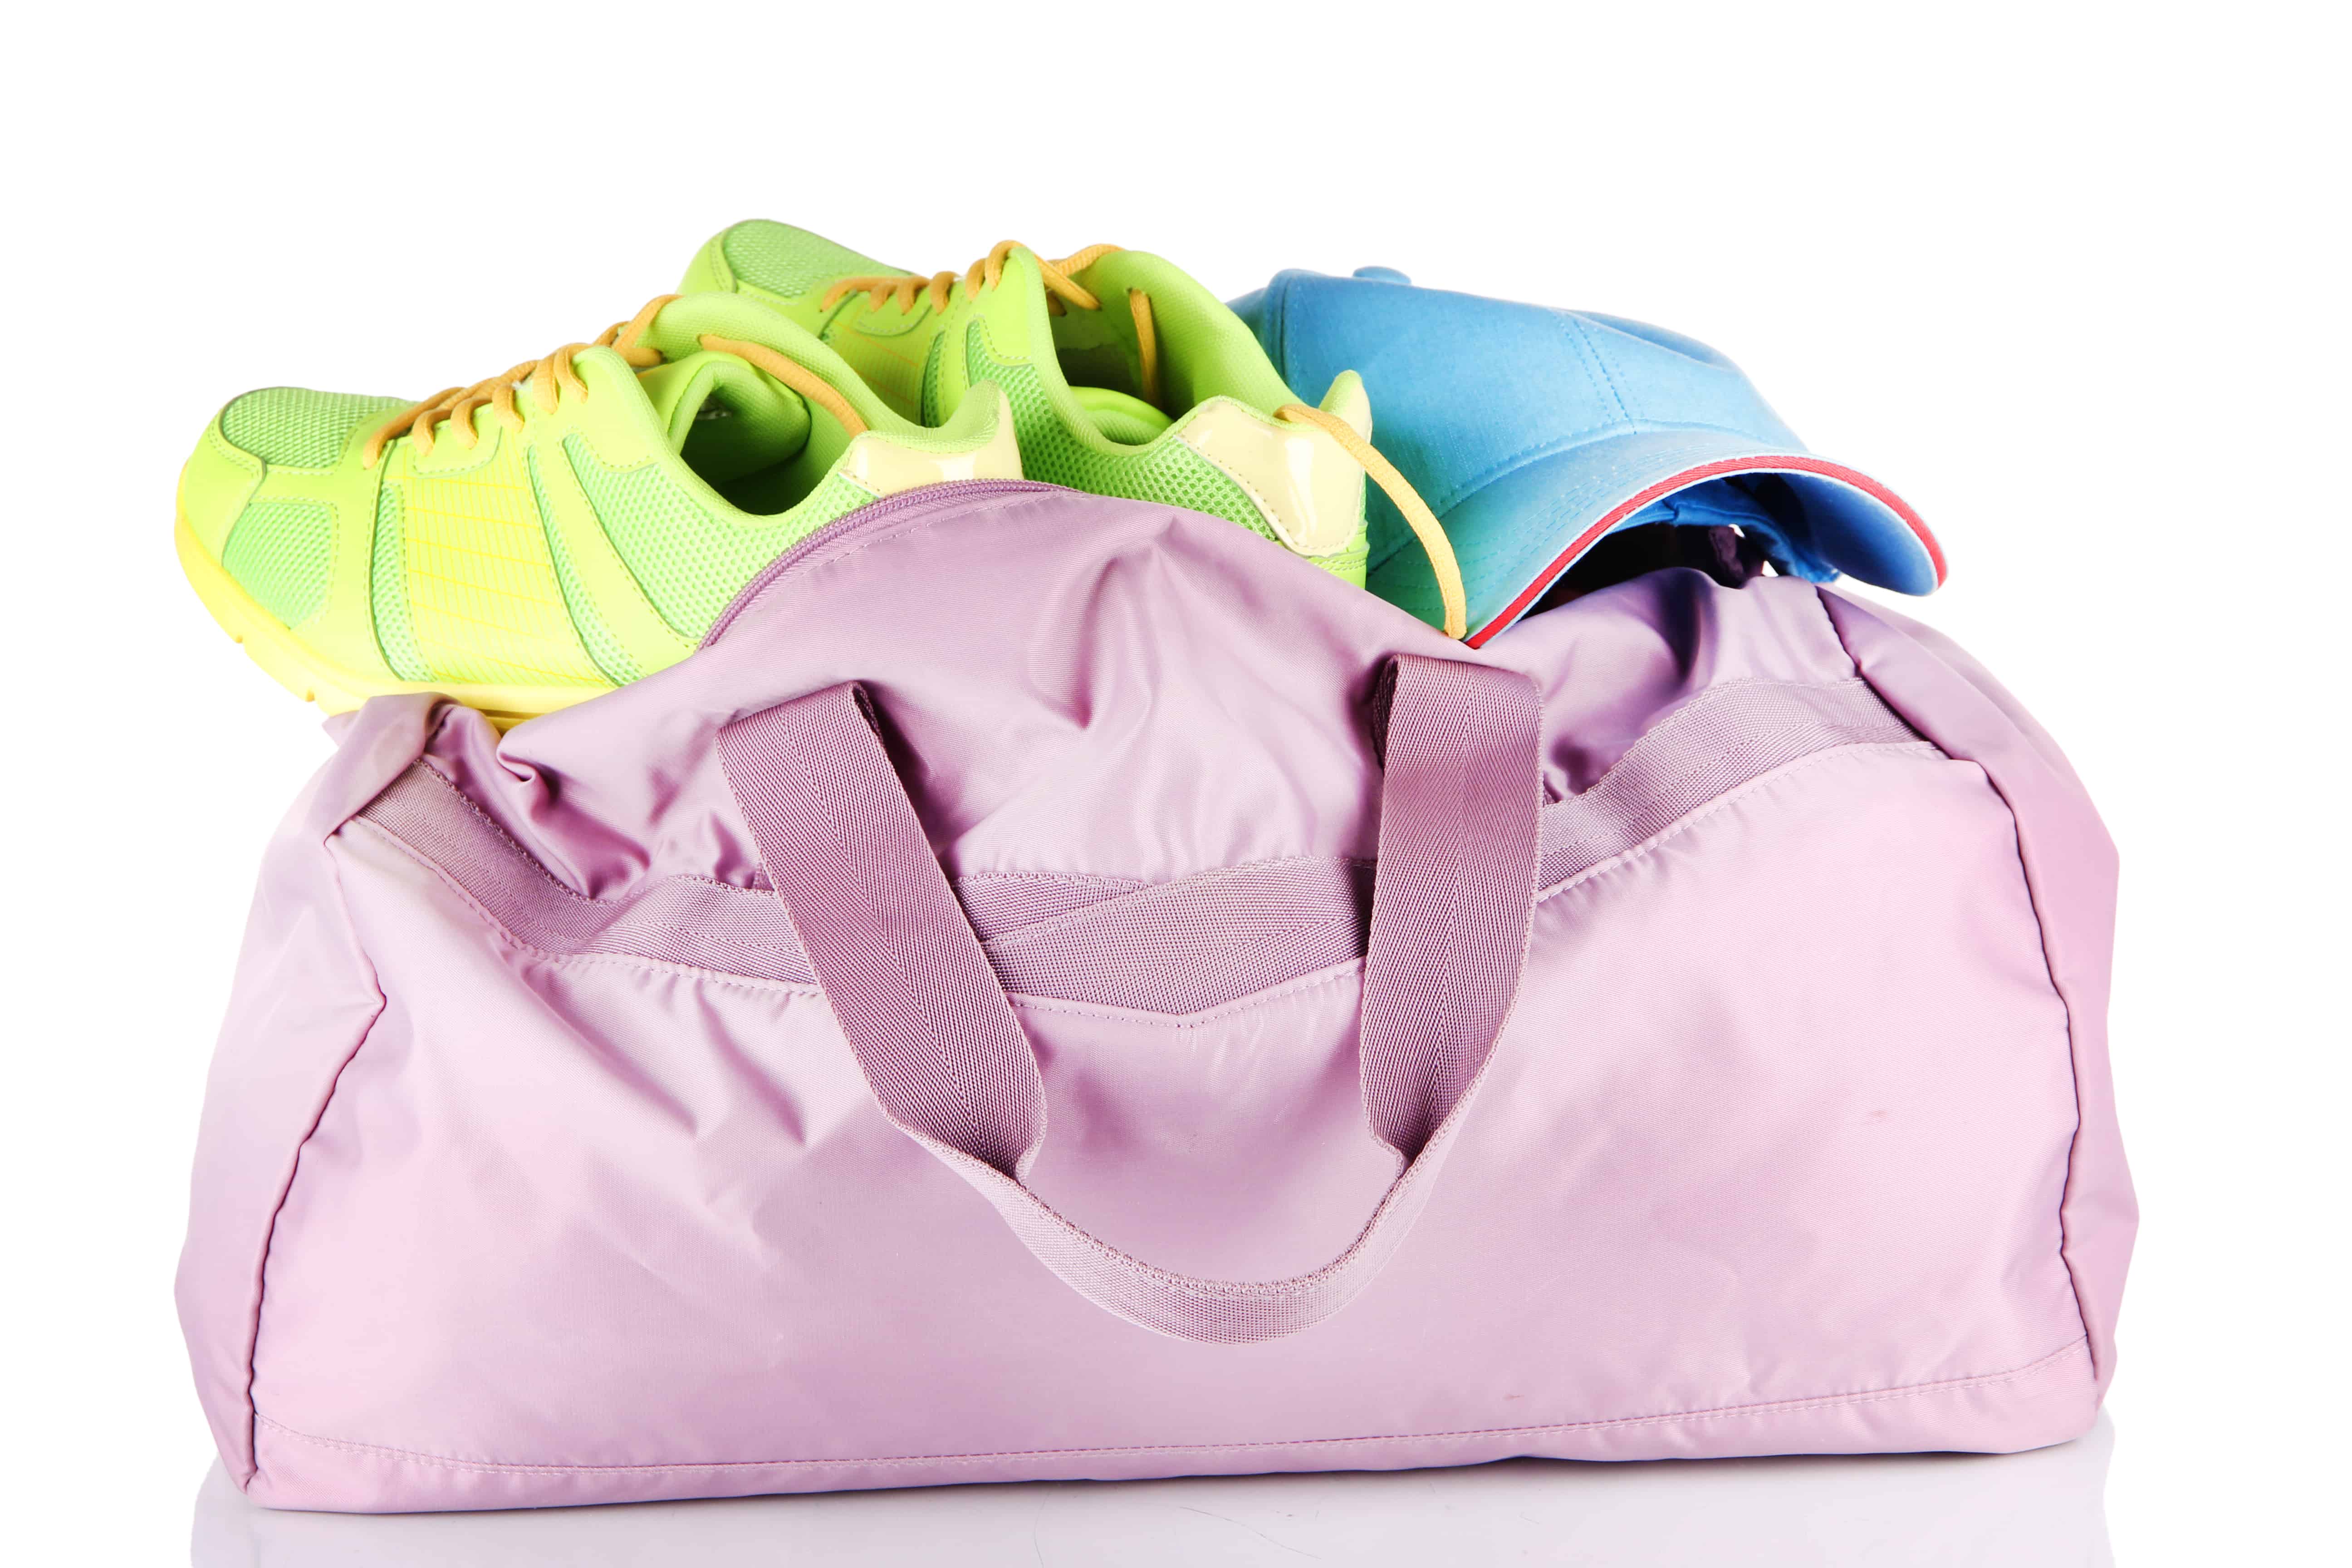 The 7 Best Tennis Bags for Women in 2022 - The Tennis Mom